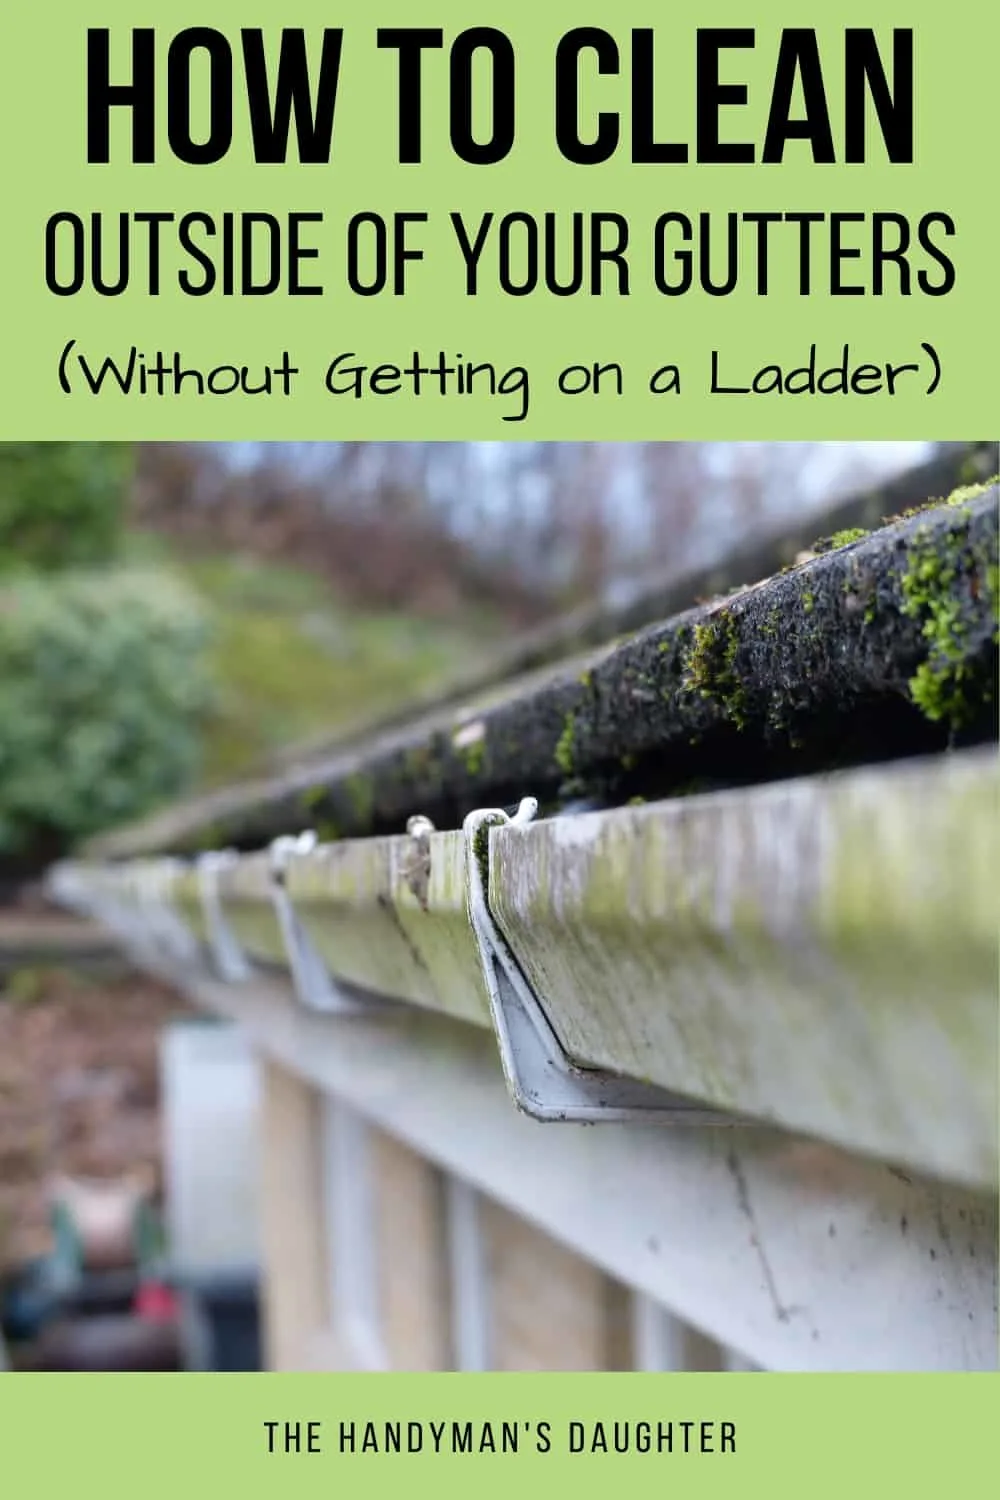 Gutter Cleaning Services Indianapolis IN